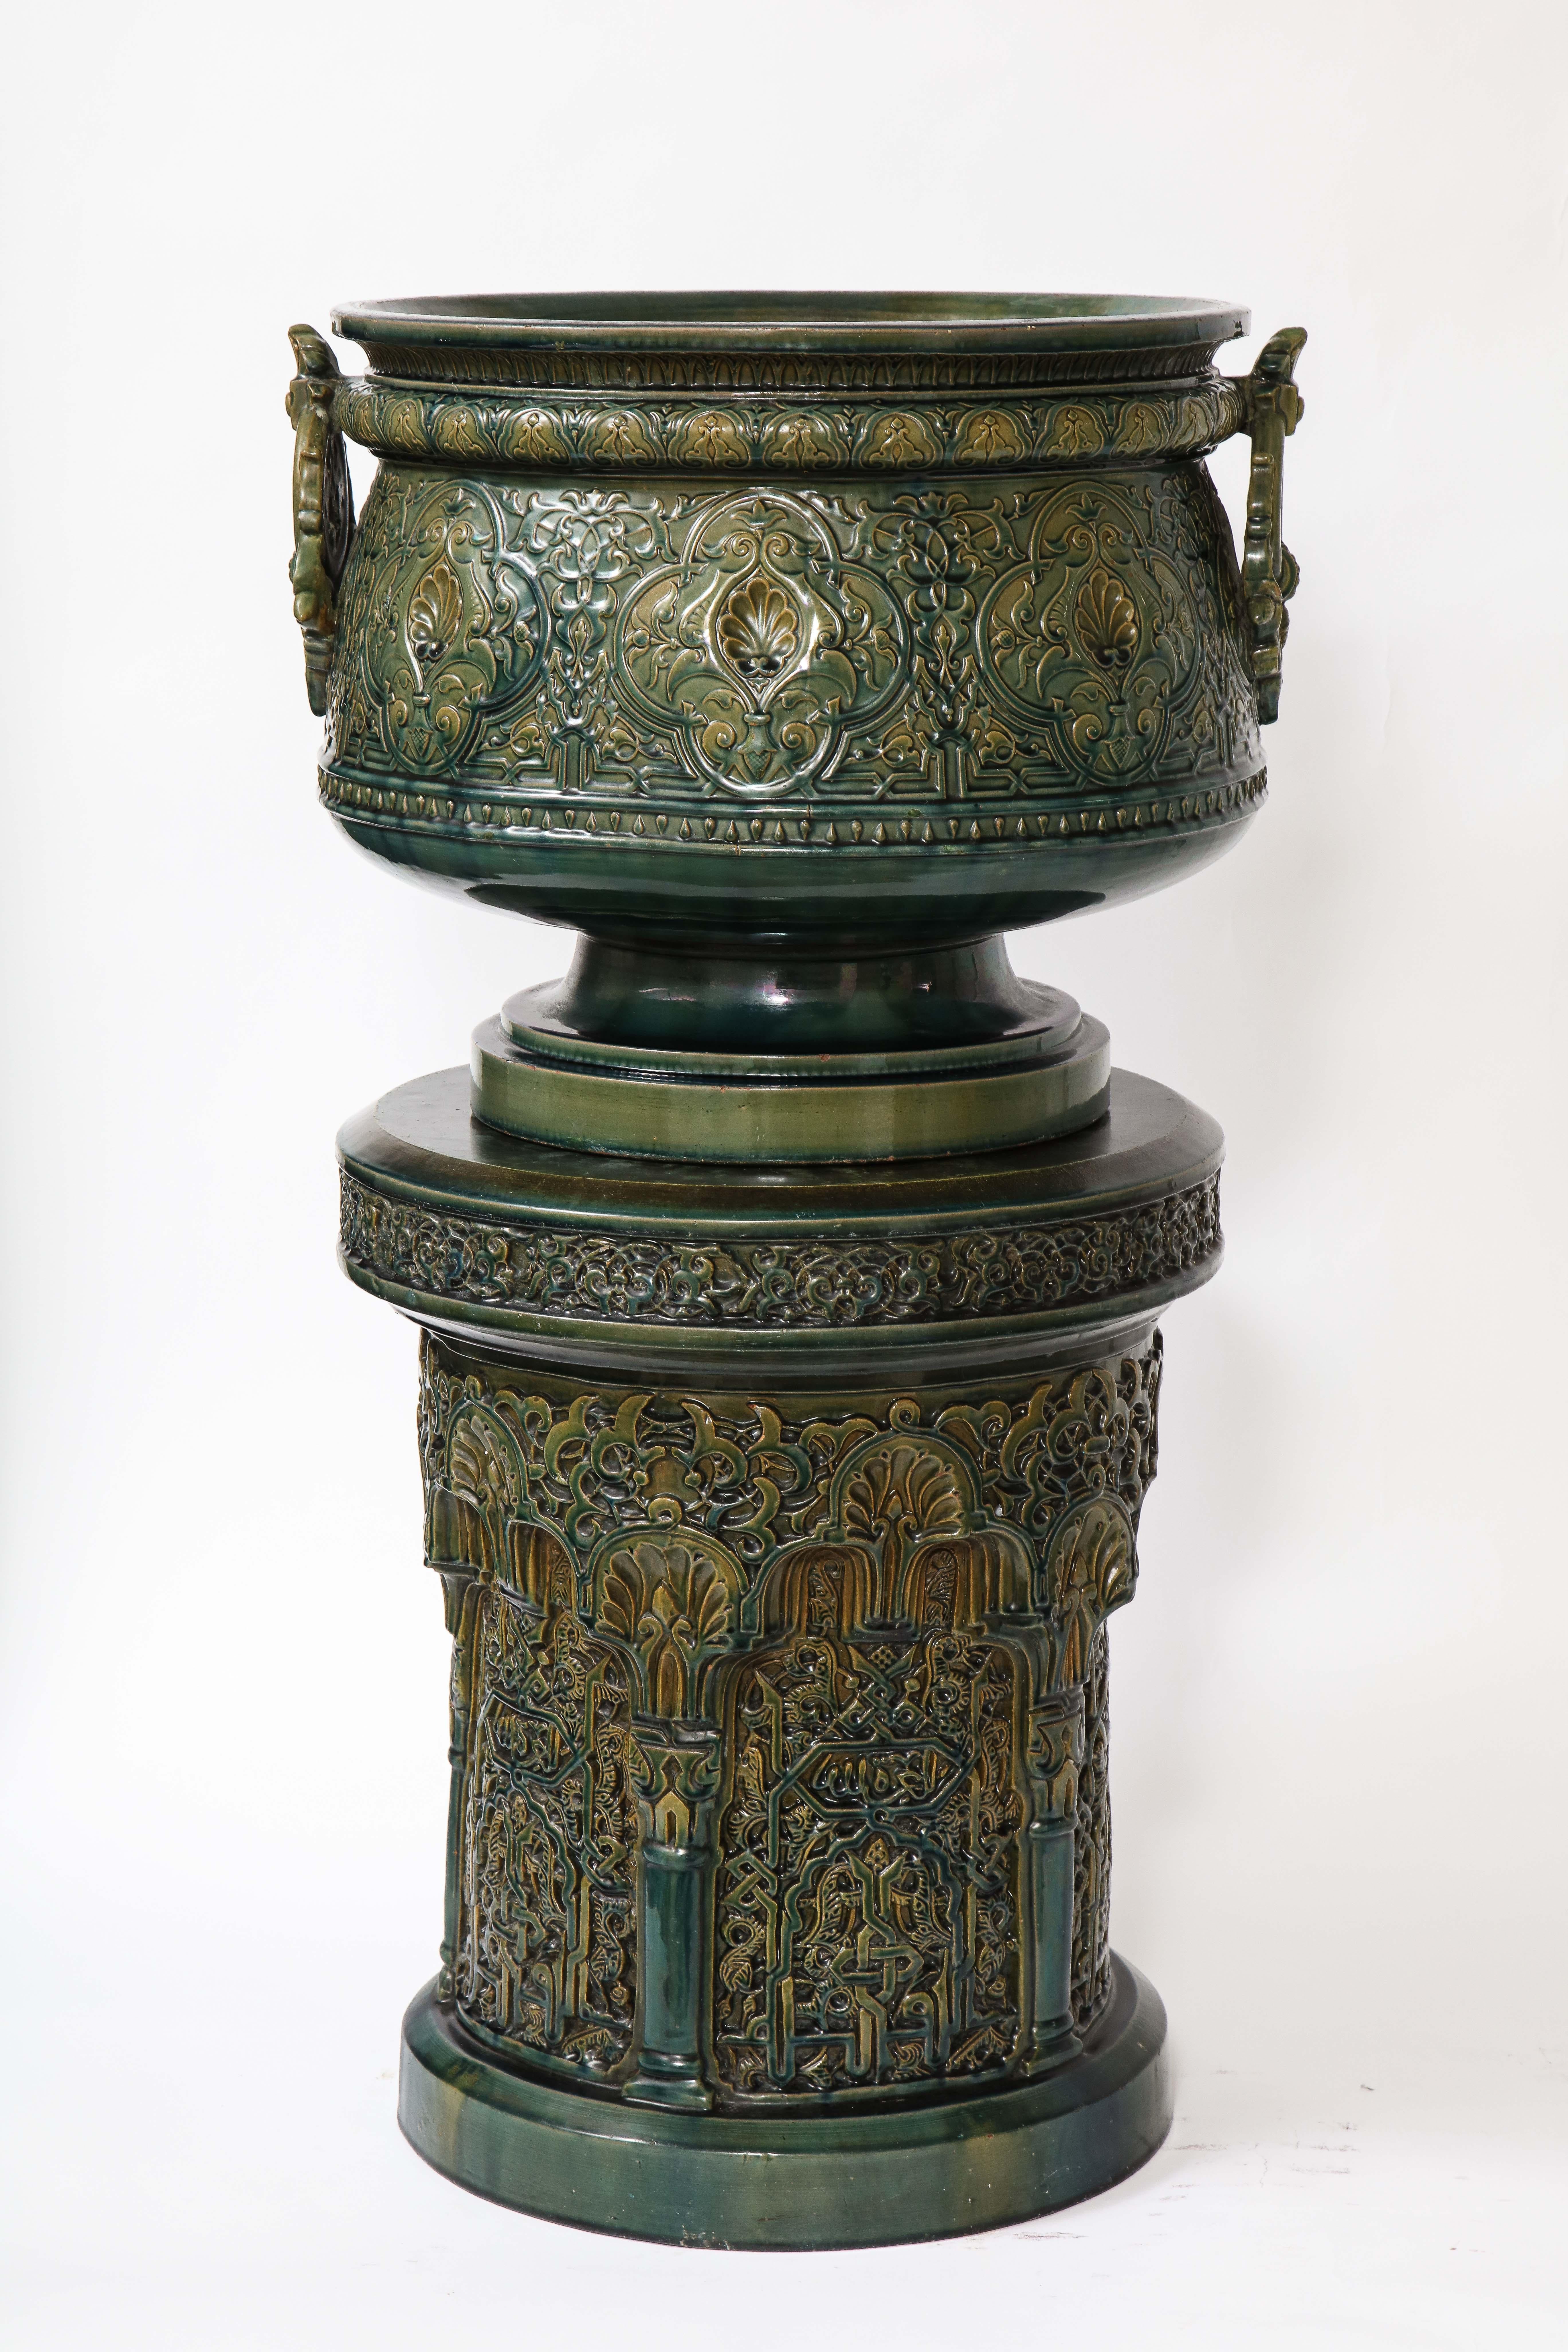 A Monumental Exceptionally Made Islamic style green glazed earthenware three-piece vase and pedestal centerpiece. This is an extraordinary earthenware vase signed by the great maker Theodore deck. Of the many fantastic pieces he has made and we have